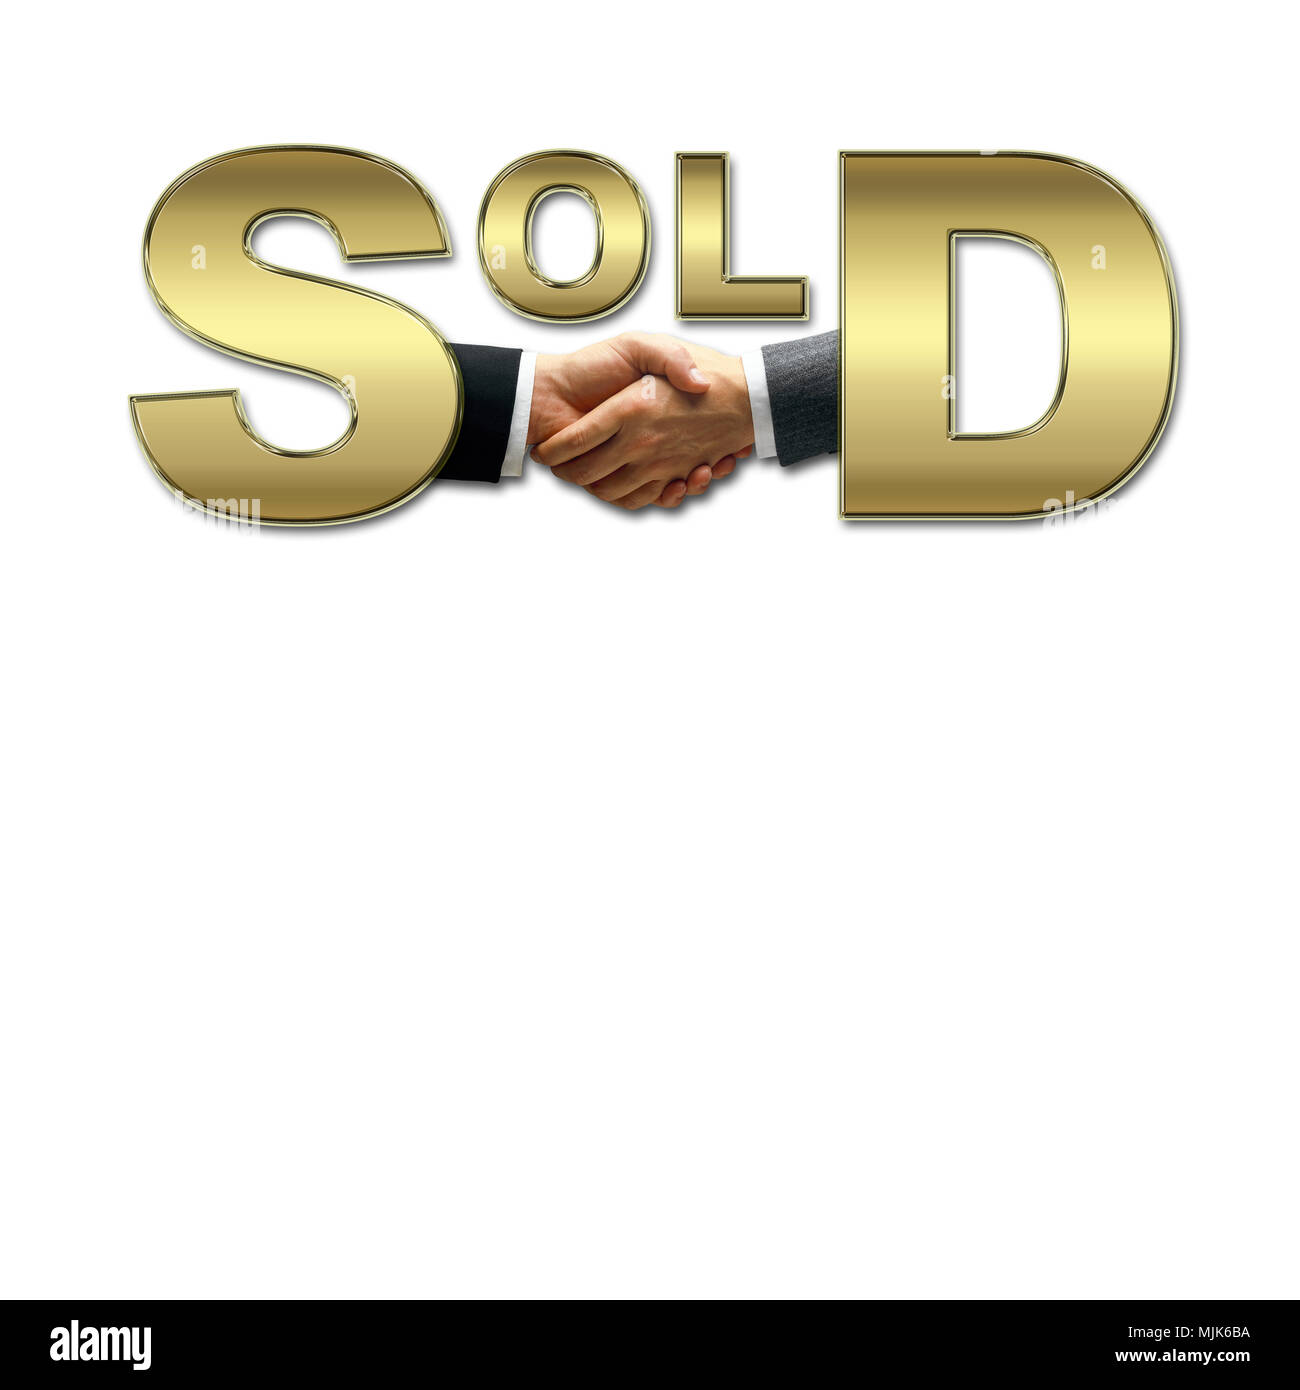 Stock Illustration - Shiny Golden Text: SOLD, human handshake sealing the deal, isolated against the white background. Stock Photo